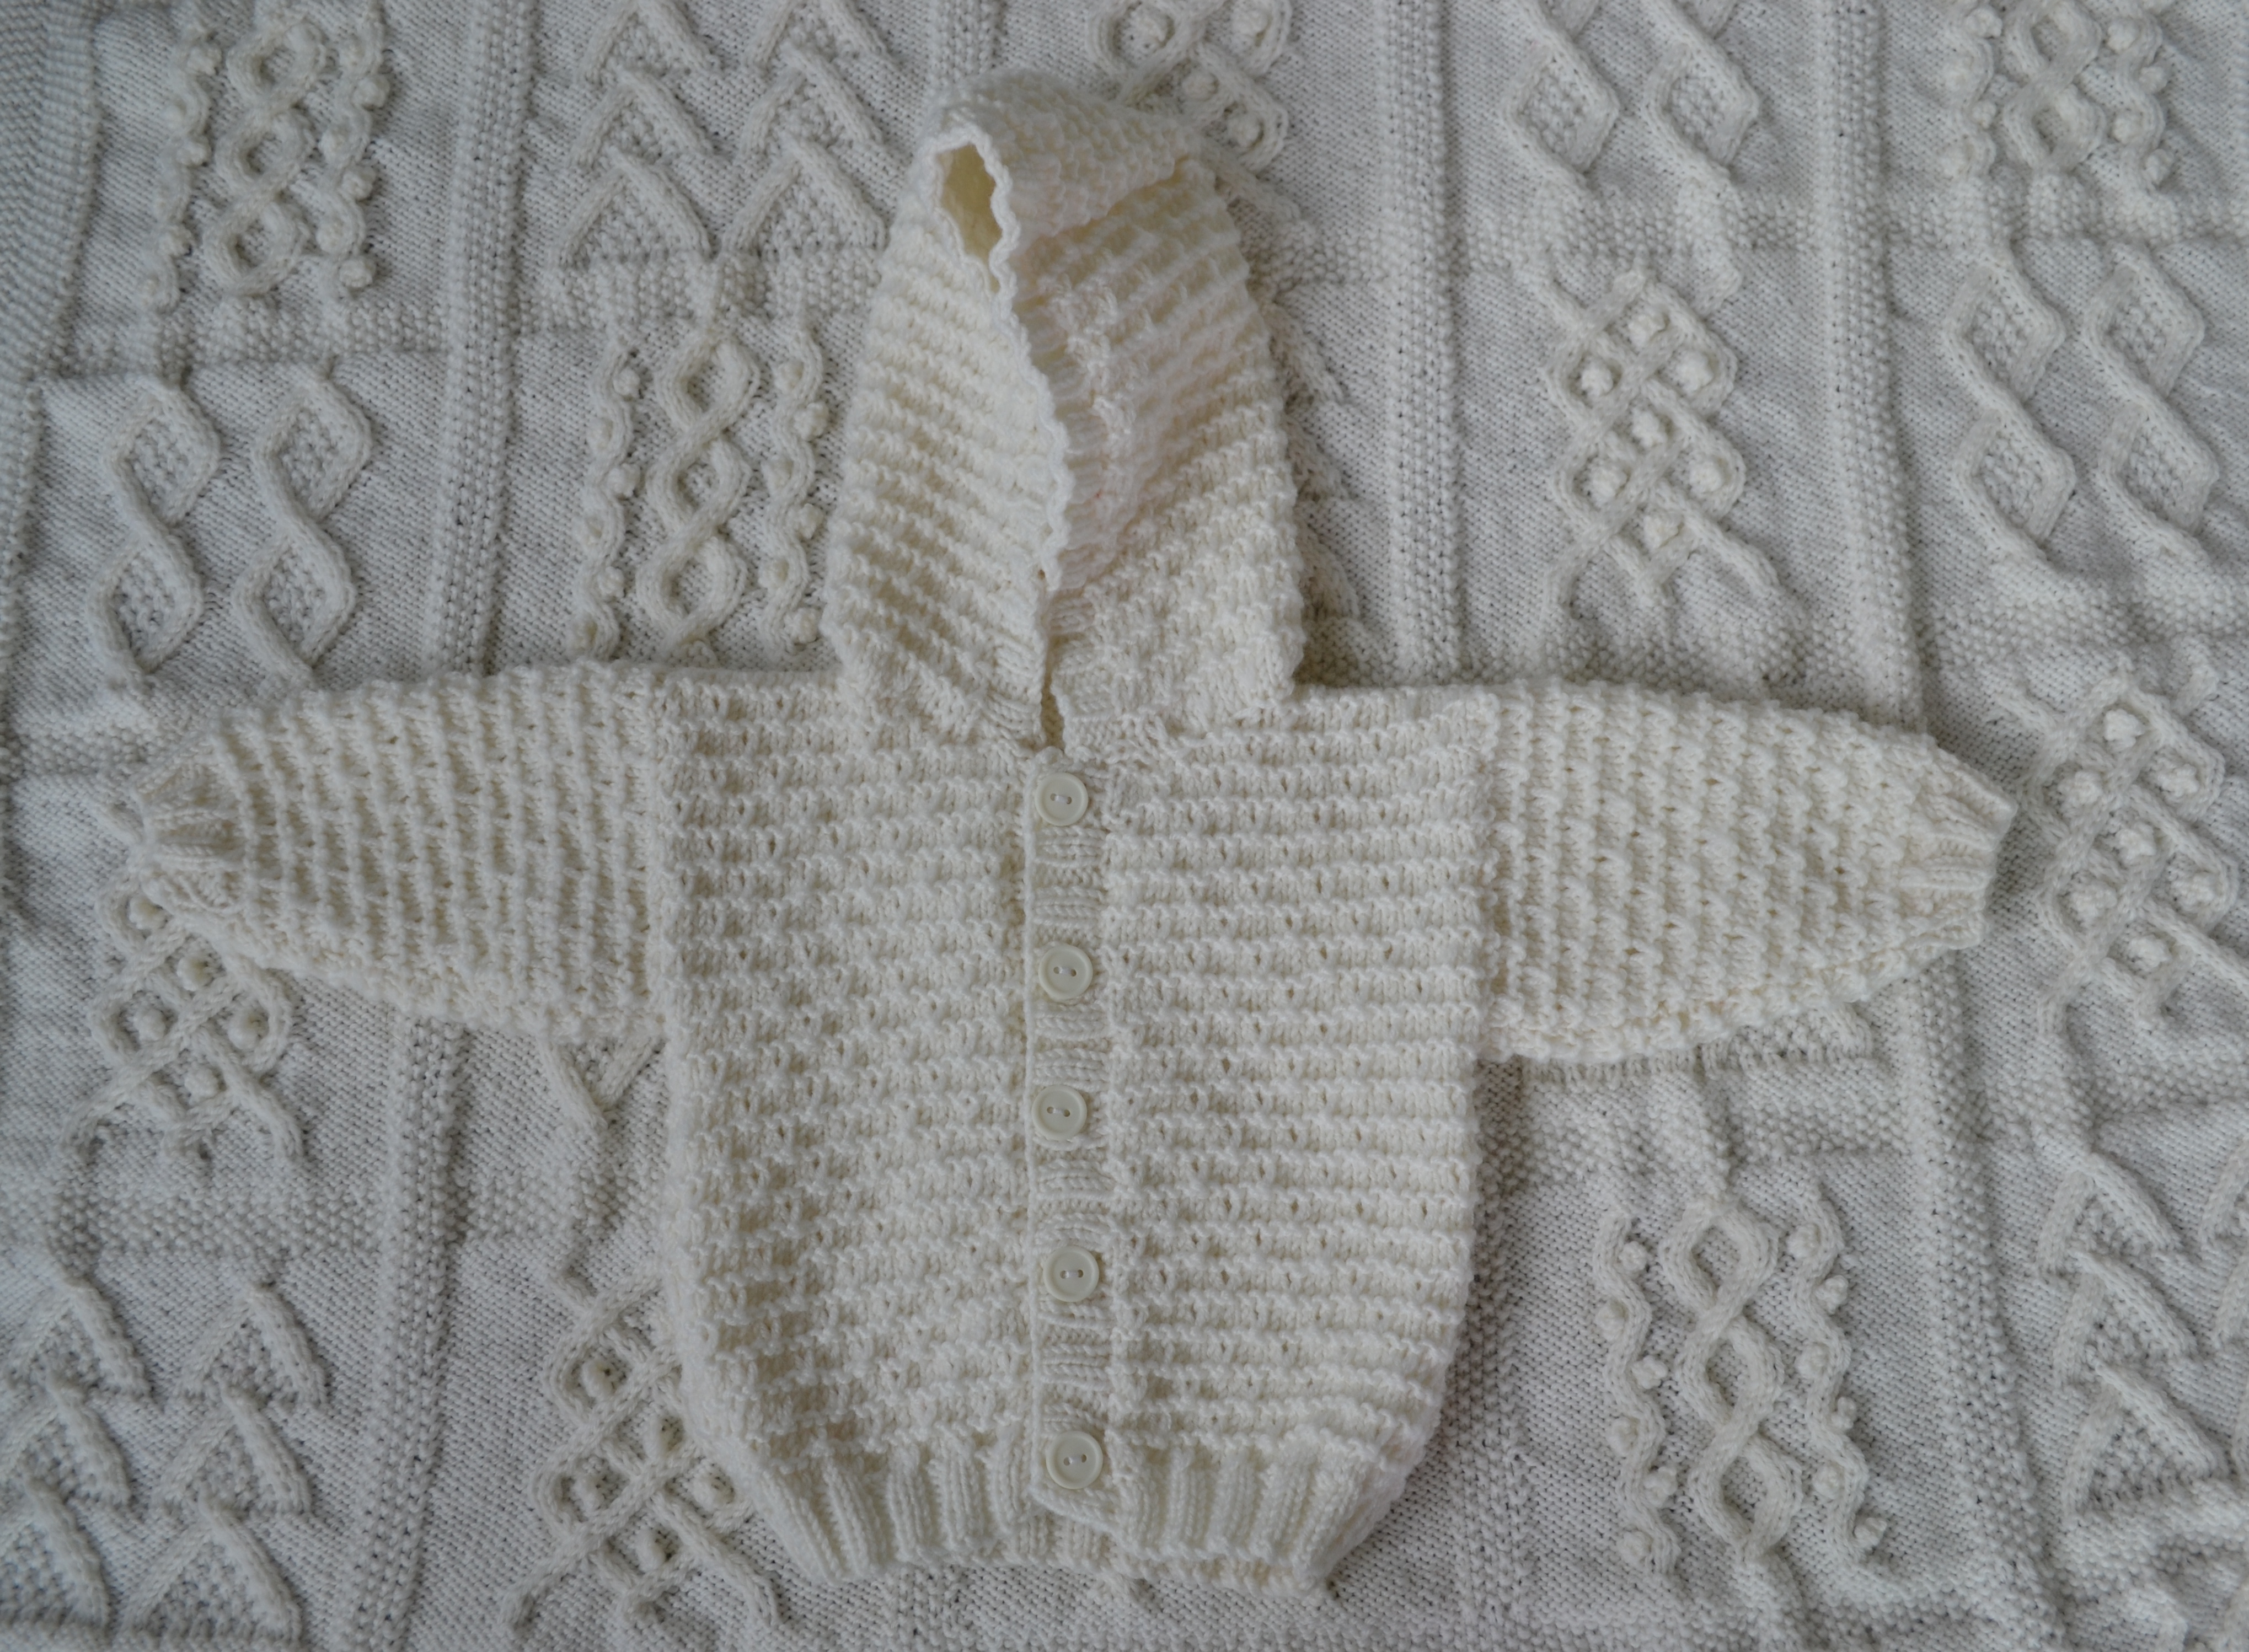 Knitting Pattern Free Download Free Double Knitting Patterns For Babies Cardigans